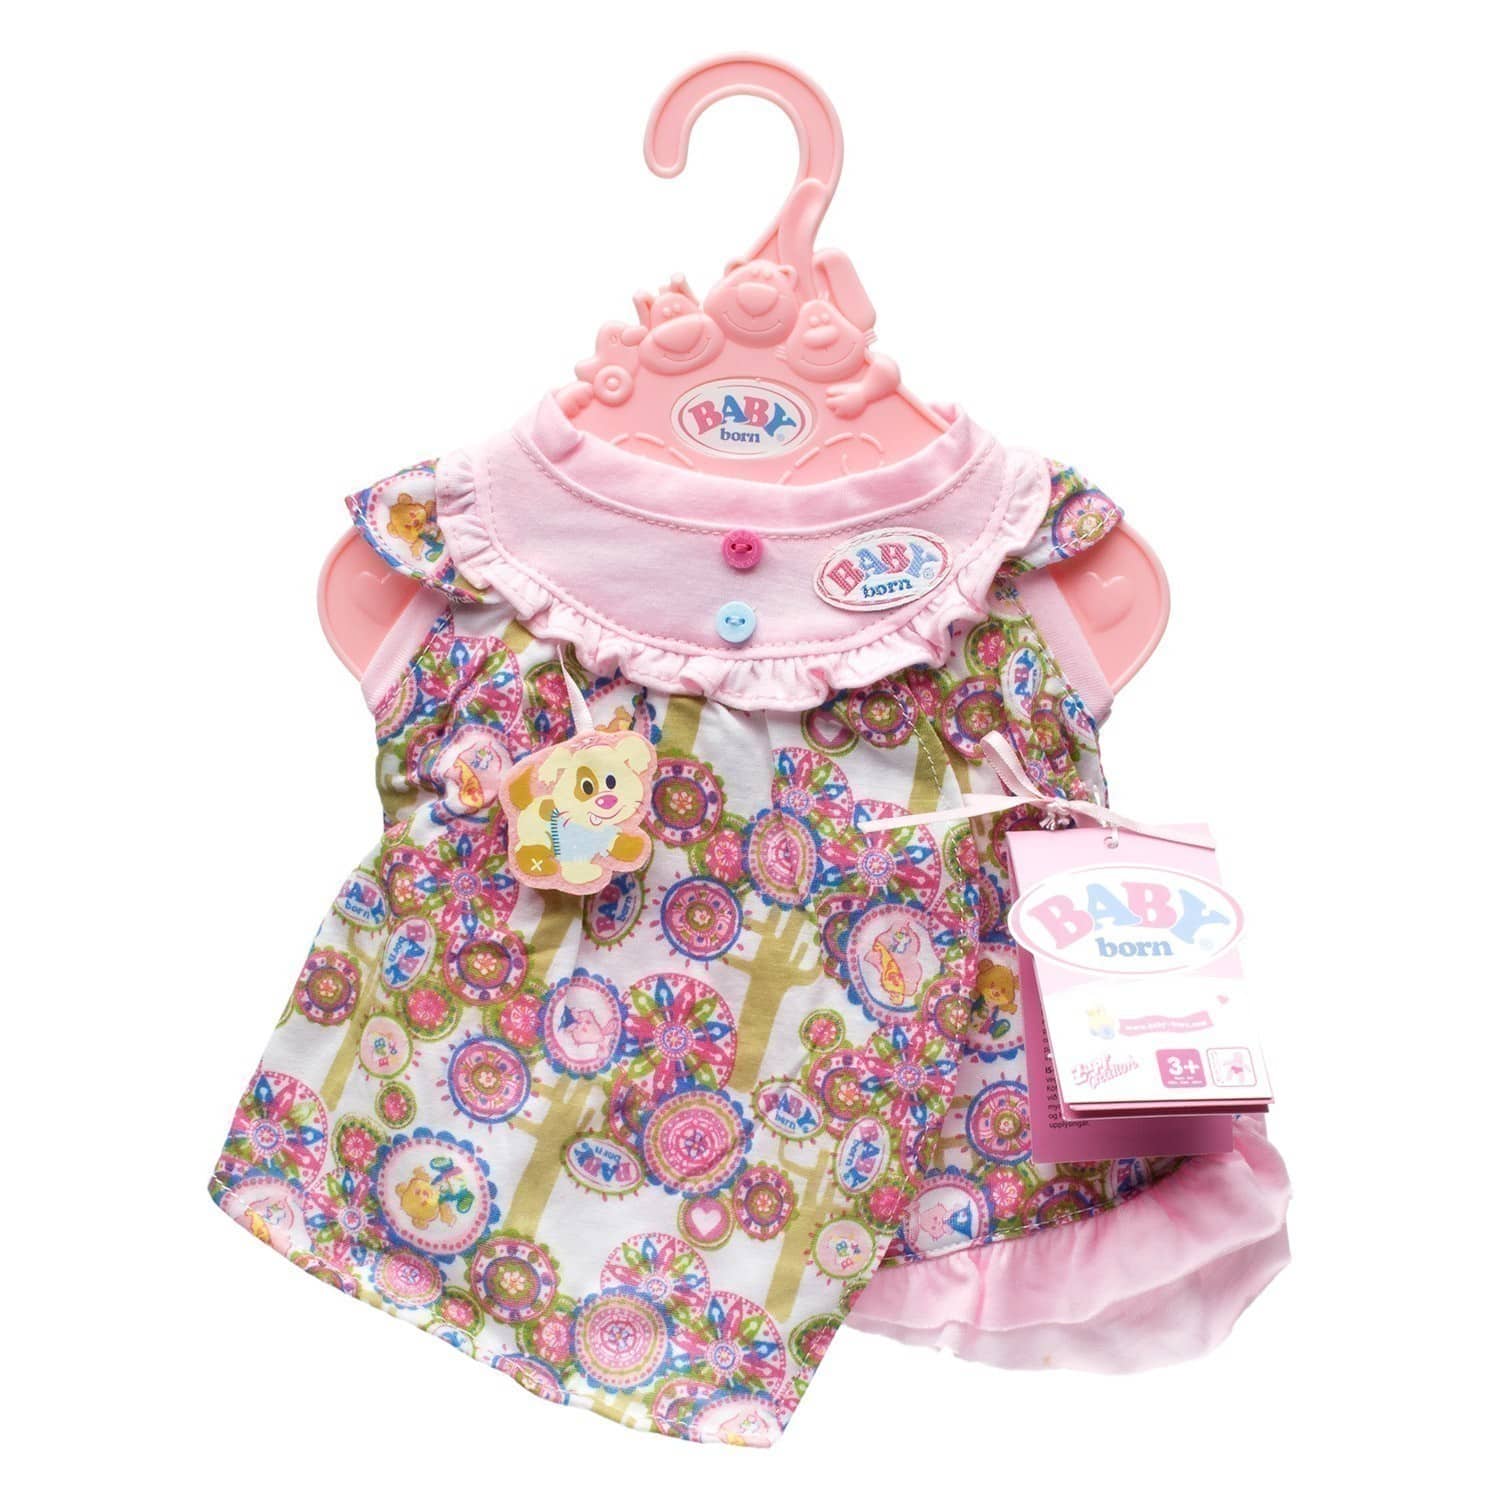 Baby Born - Baby Dress Collection - Pink Pattern